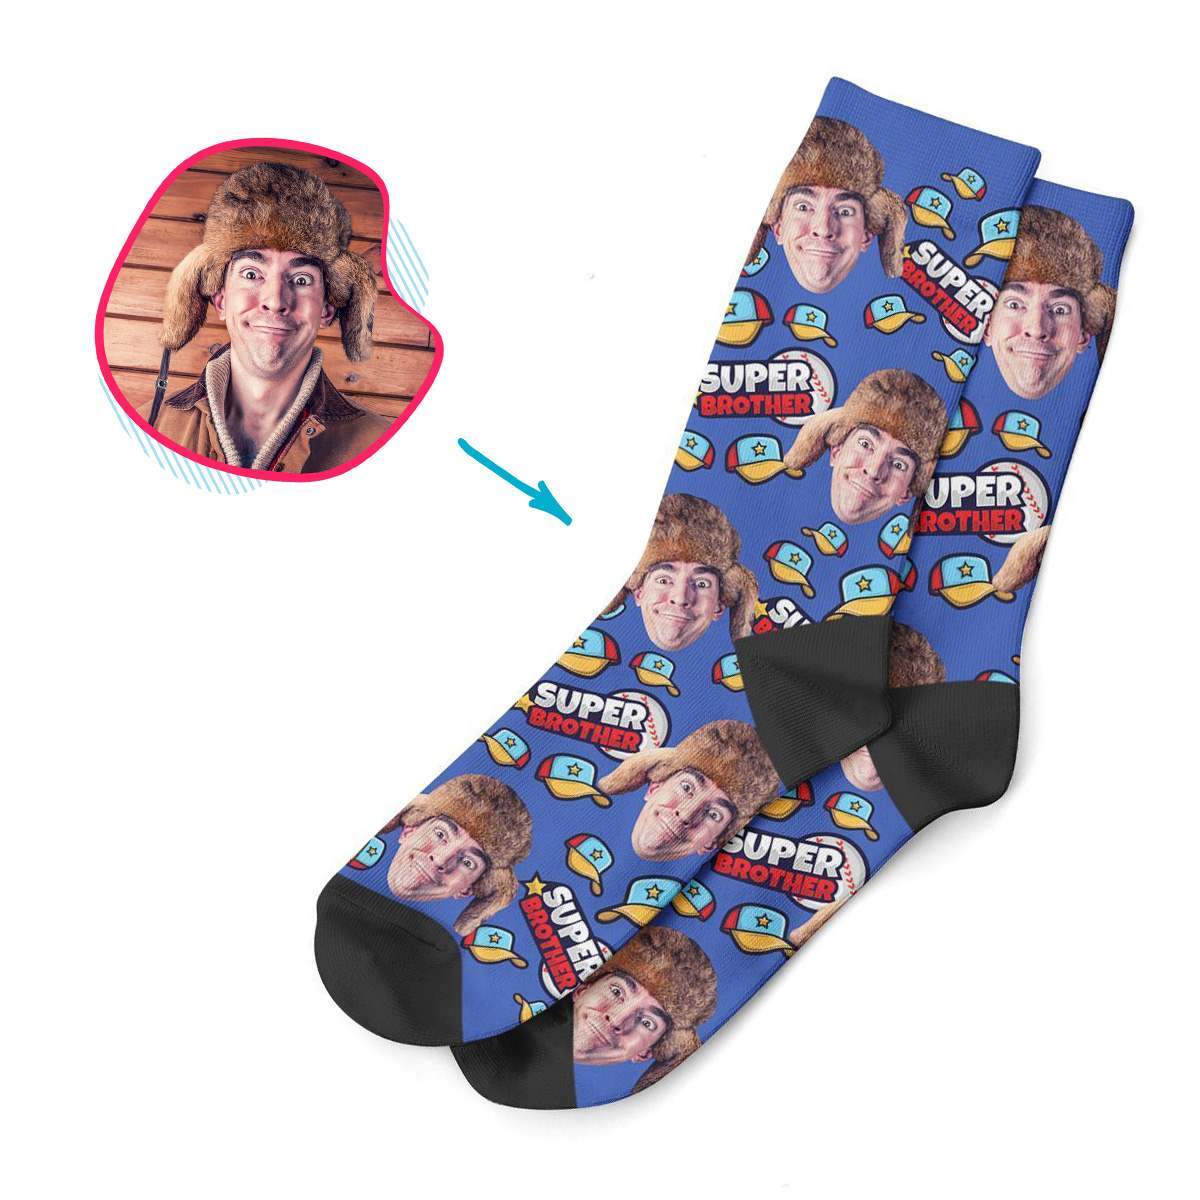 Super Brother Personalized Socks